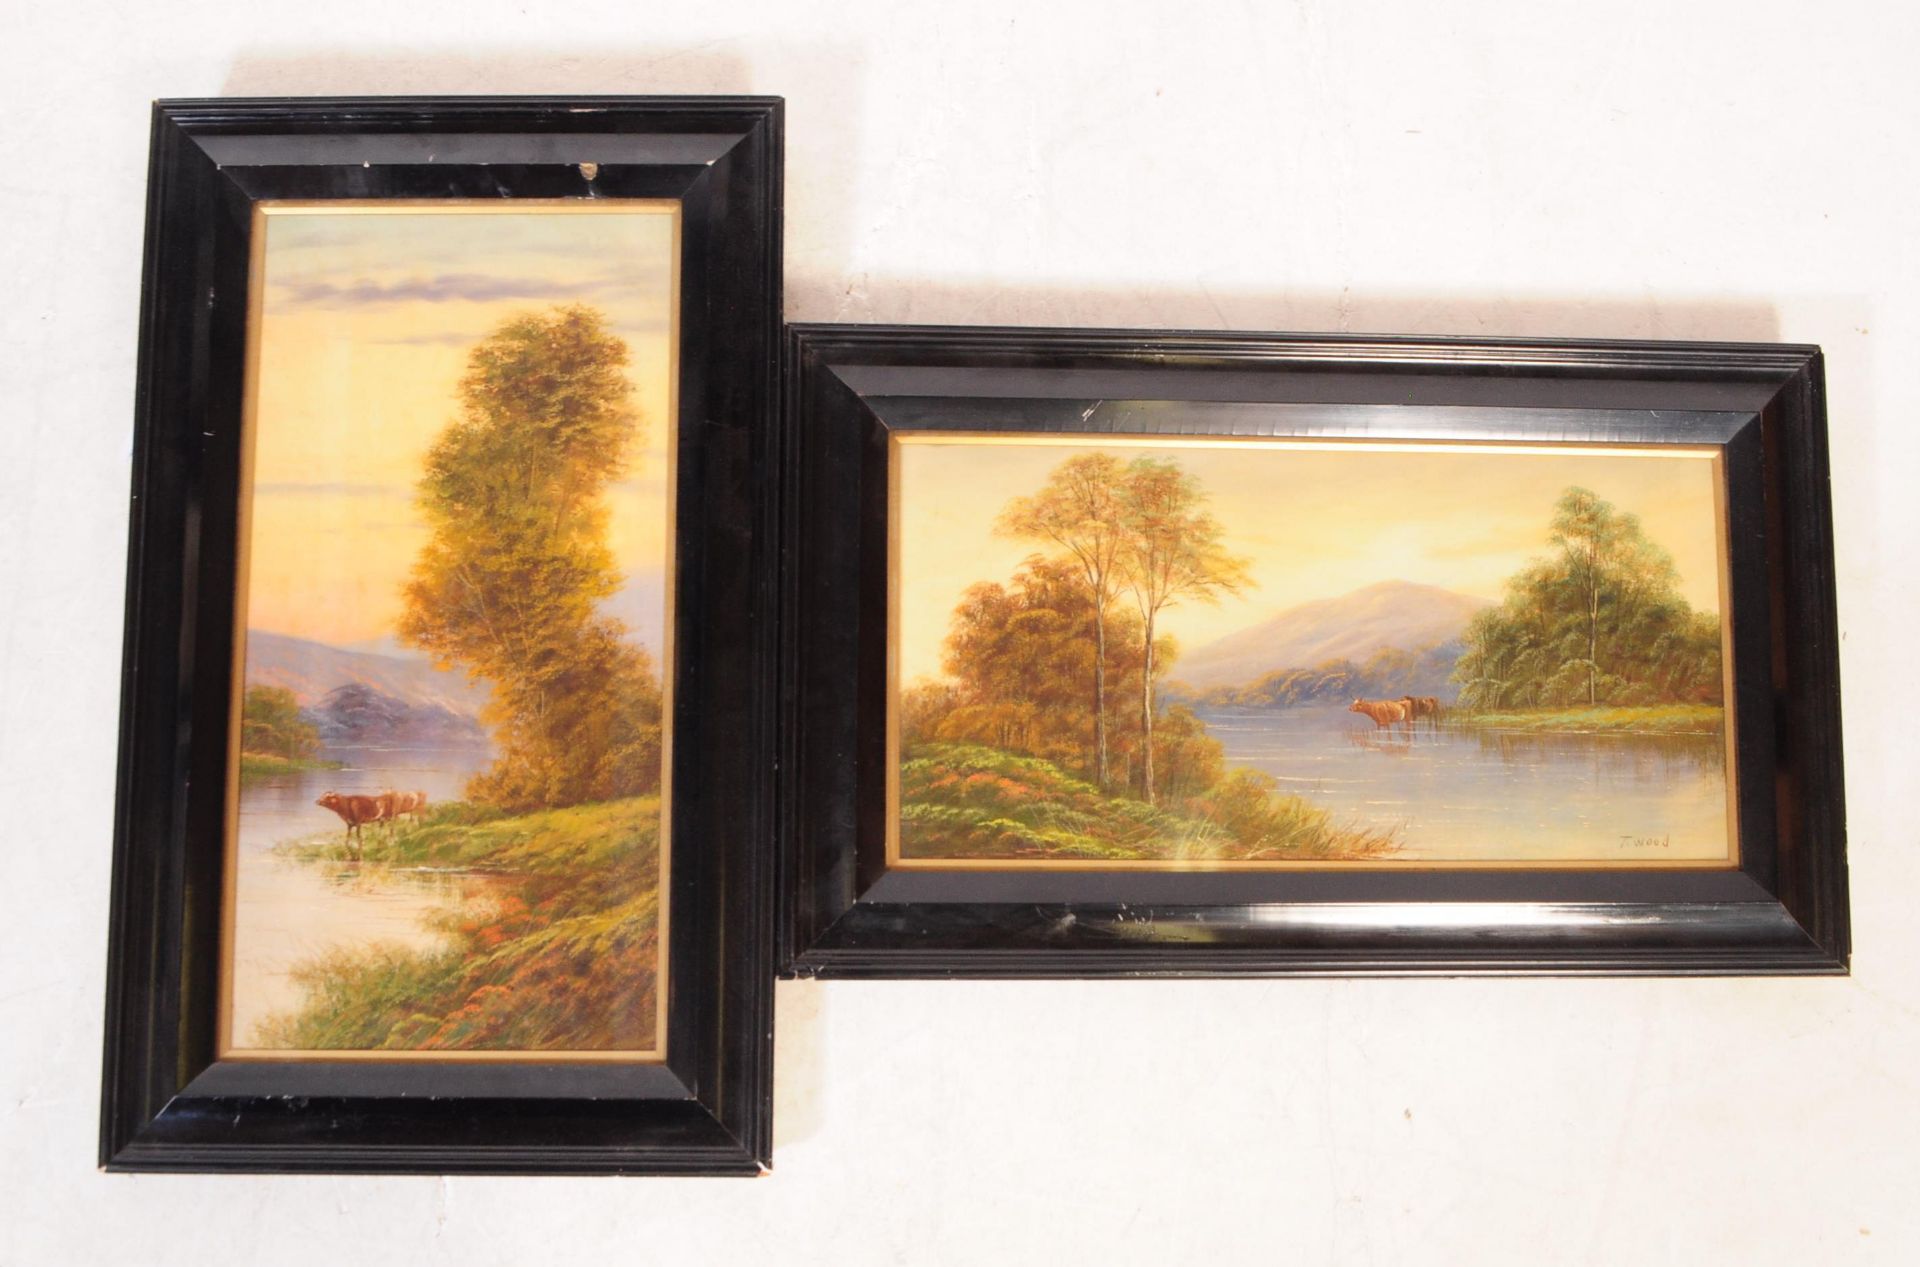 T. WOOD - TWO OIL ON BOARD PAINTINGS DEPICTING LANDSCAPES